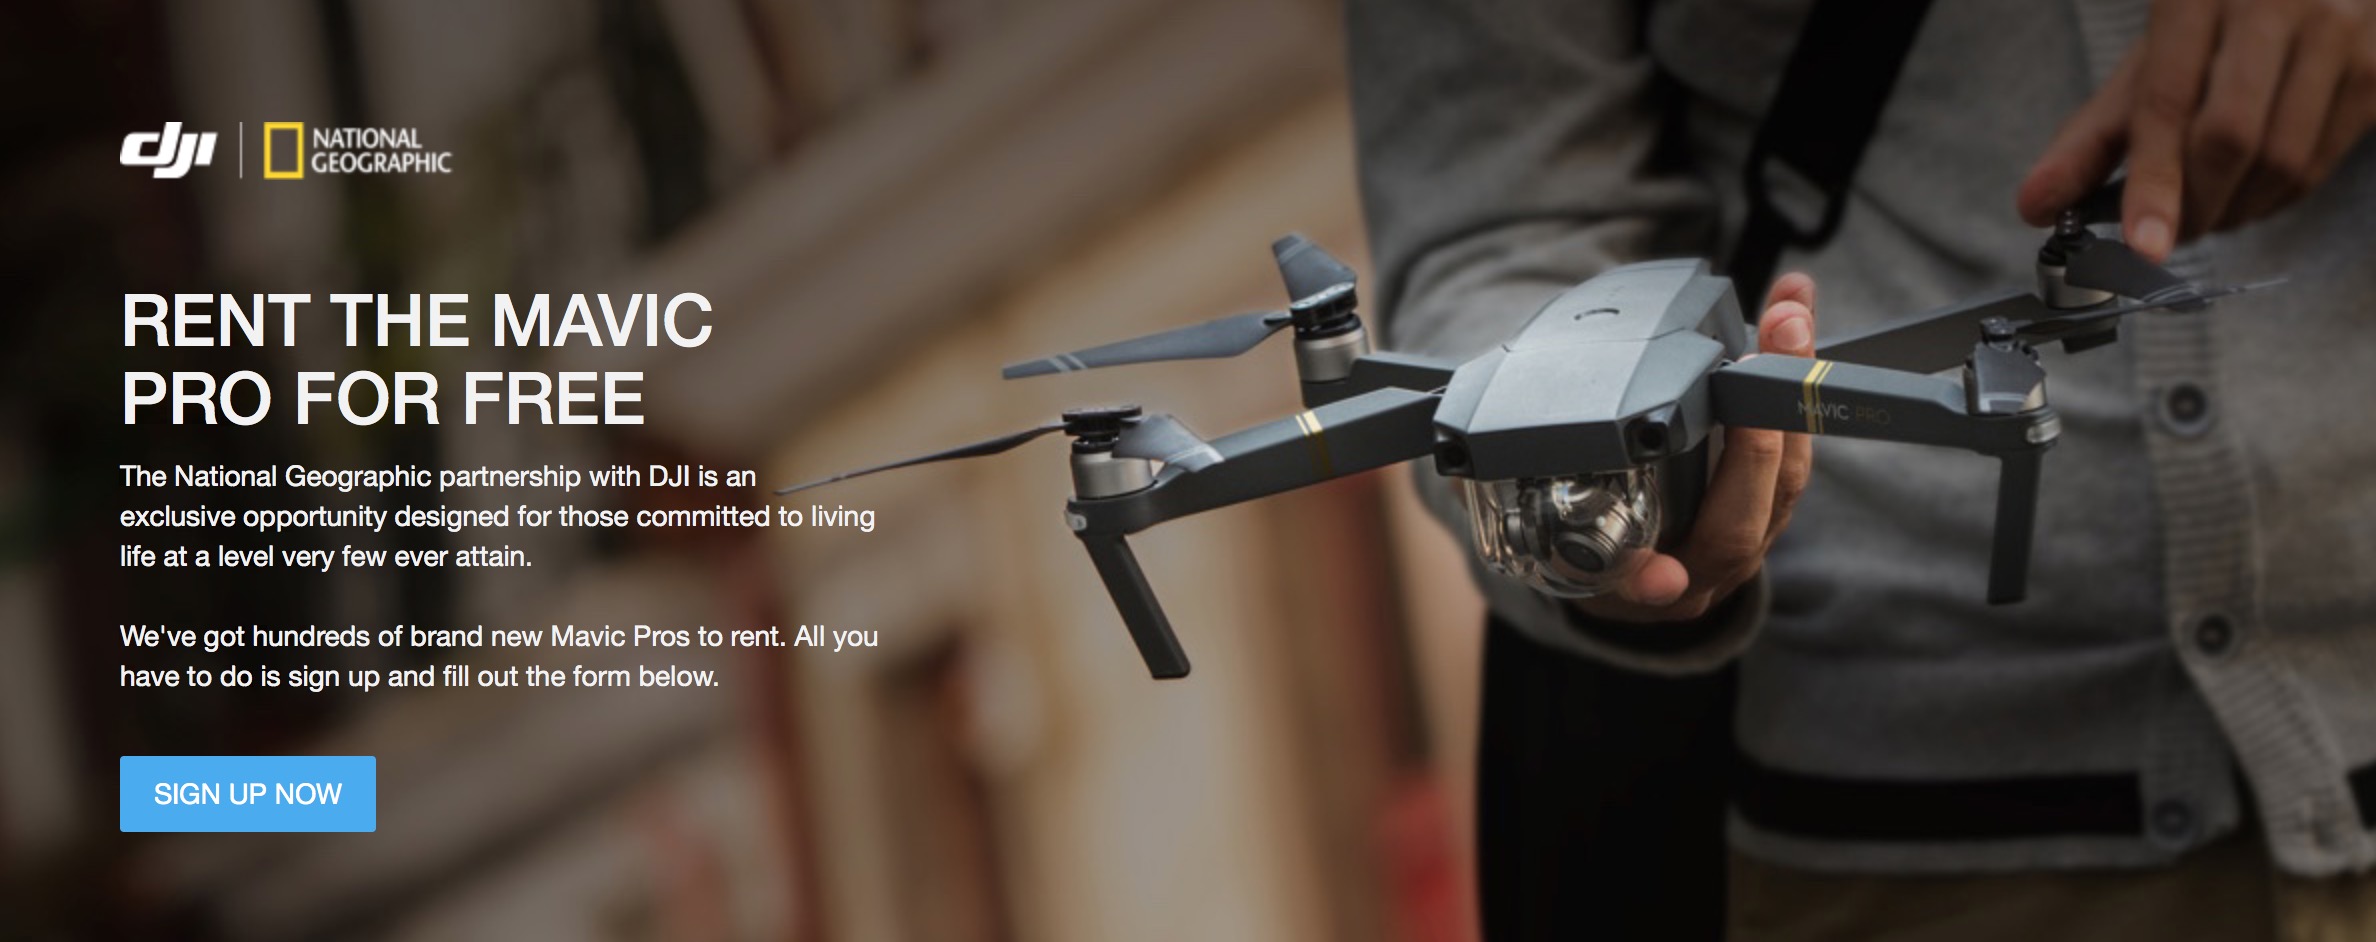 DJI and National Geographic joined forced in photo contest and free drone rental program